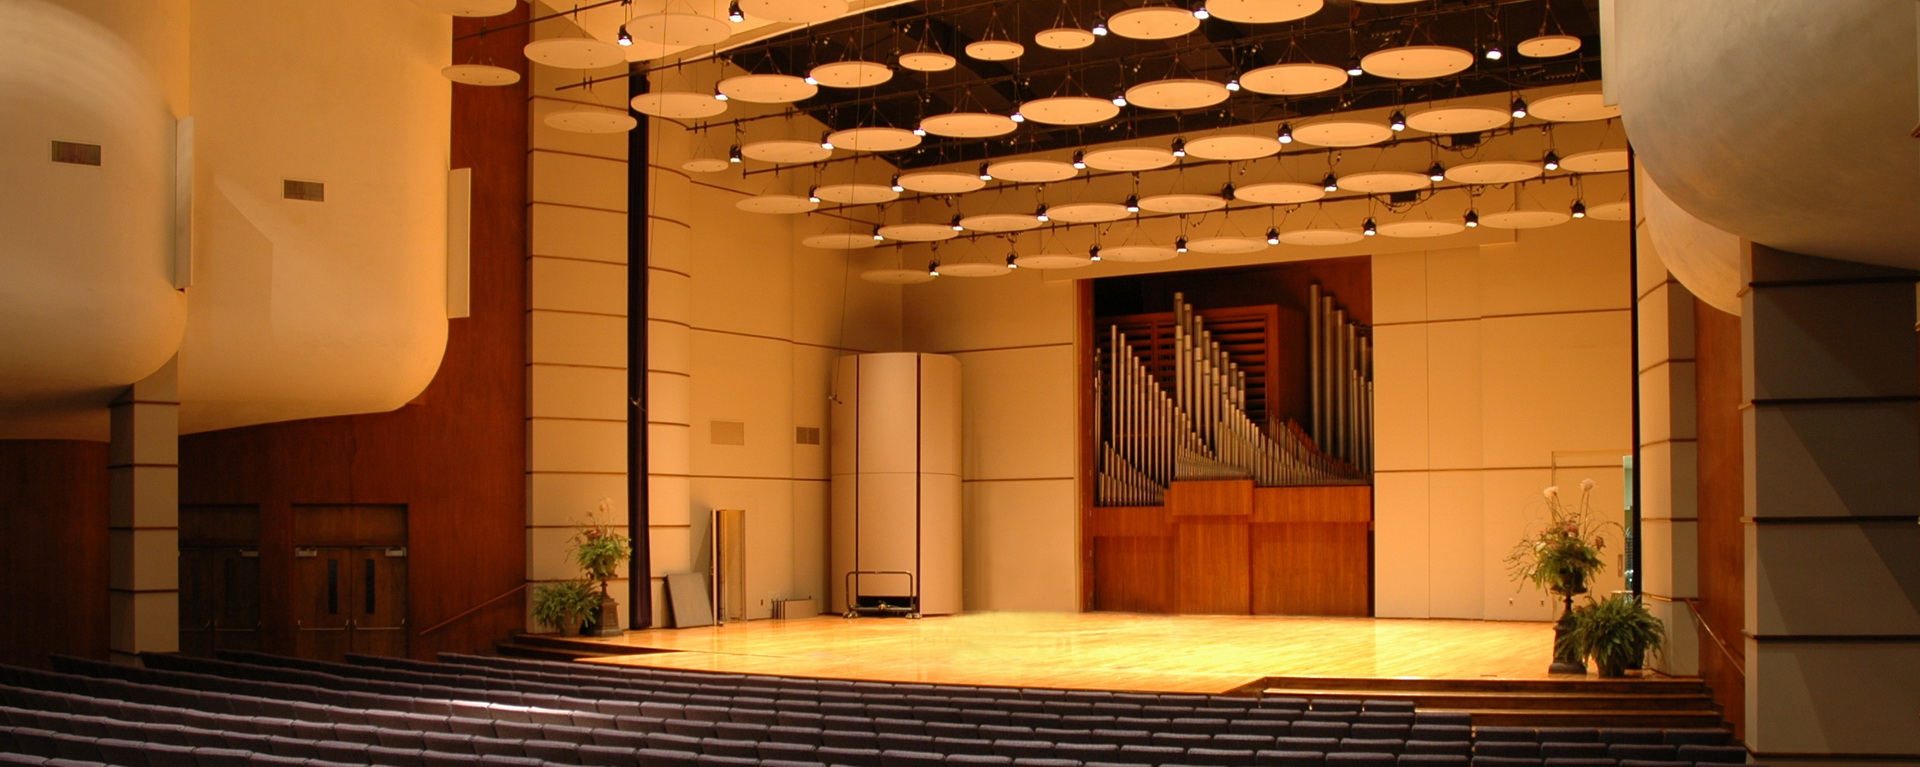 White Concert Hall interior stage and seating